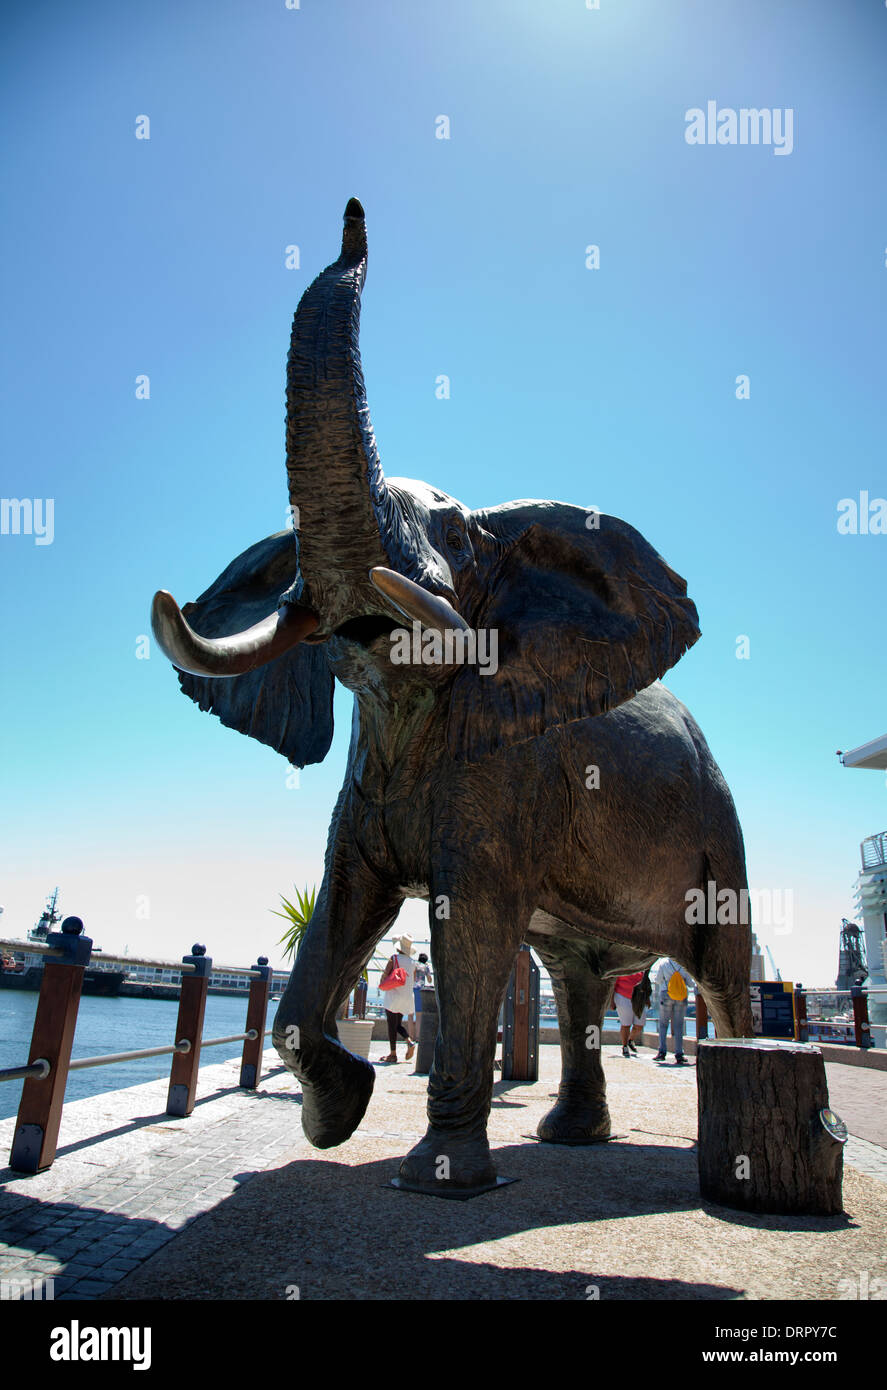 Large Elephant Sculpture for Out of Africa Childrens Foundation at V&A Waterfront in cape Town - South Africa Stock Photo